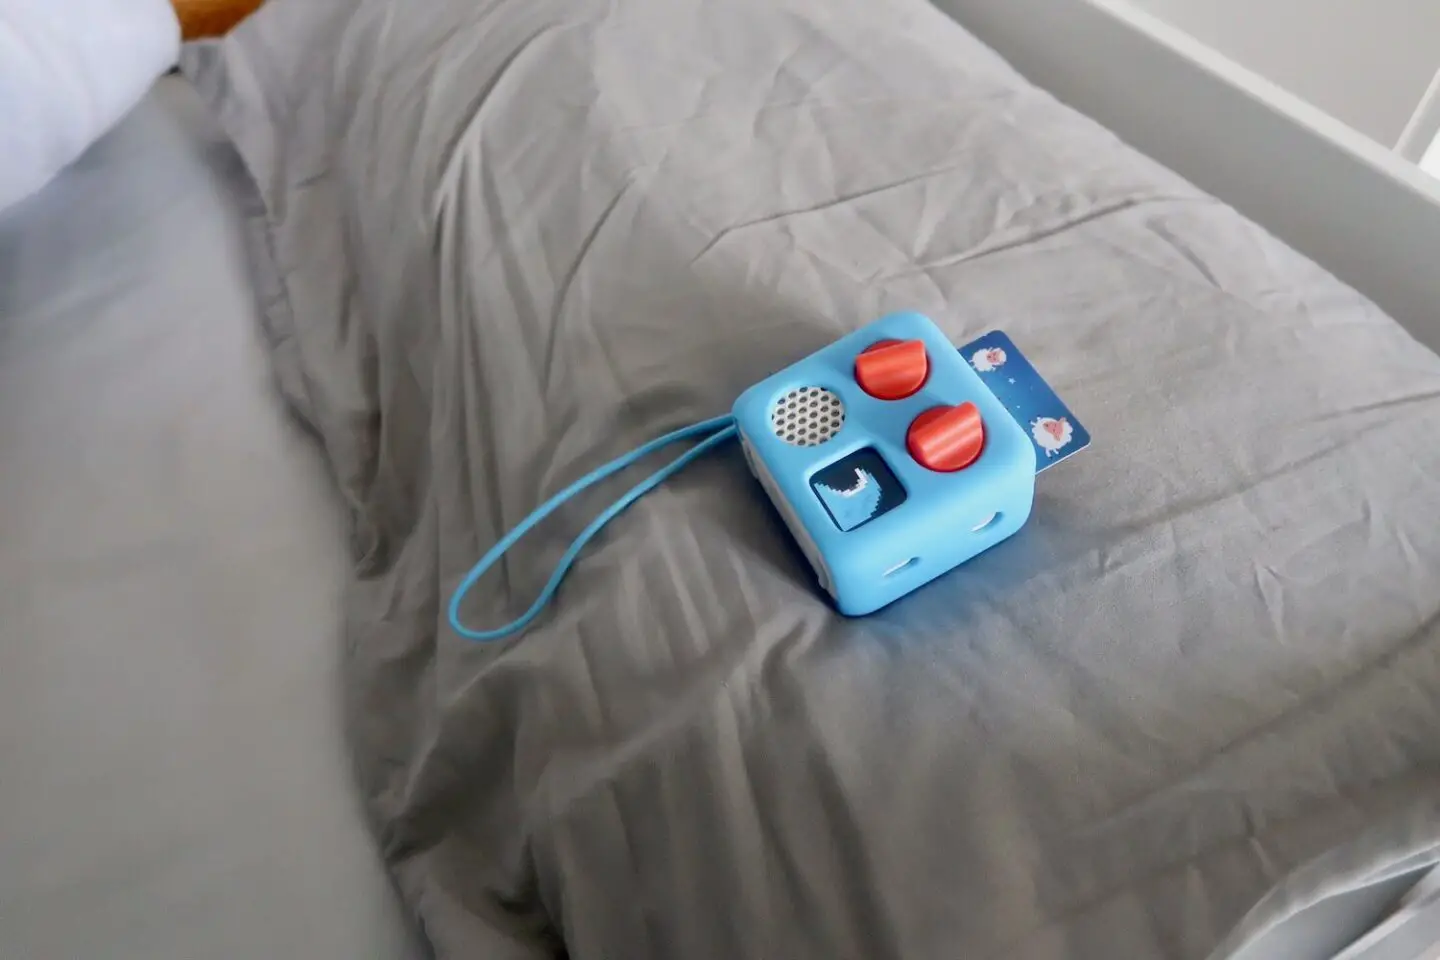 A Yoto player lying on a grey pillow on a bed